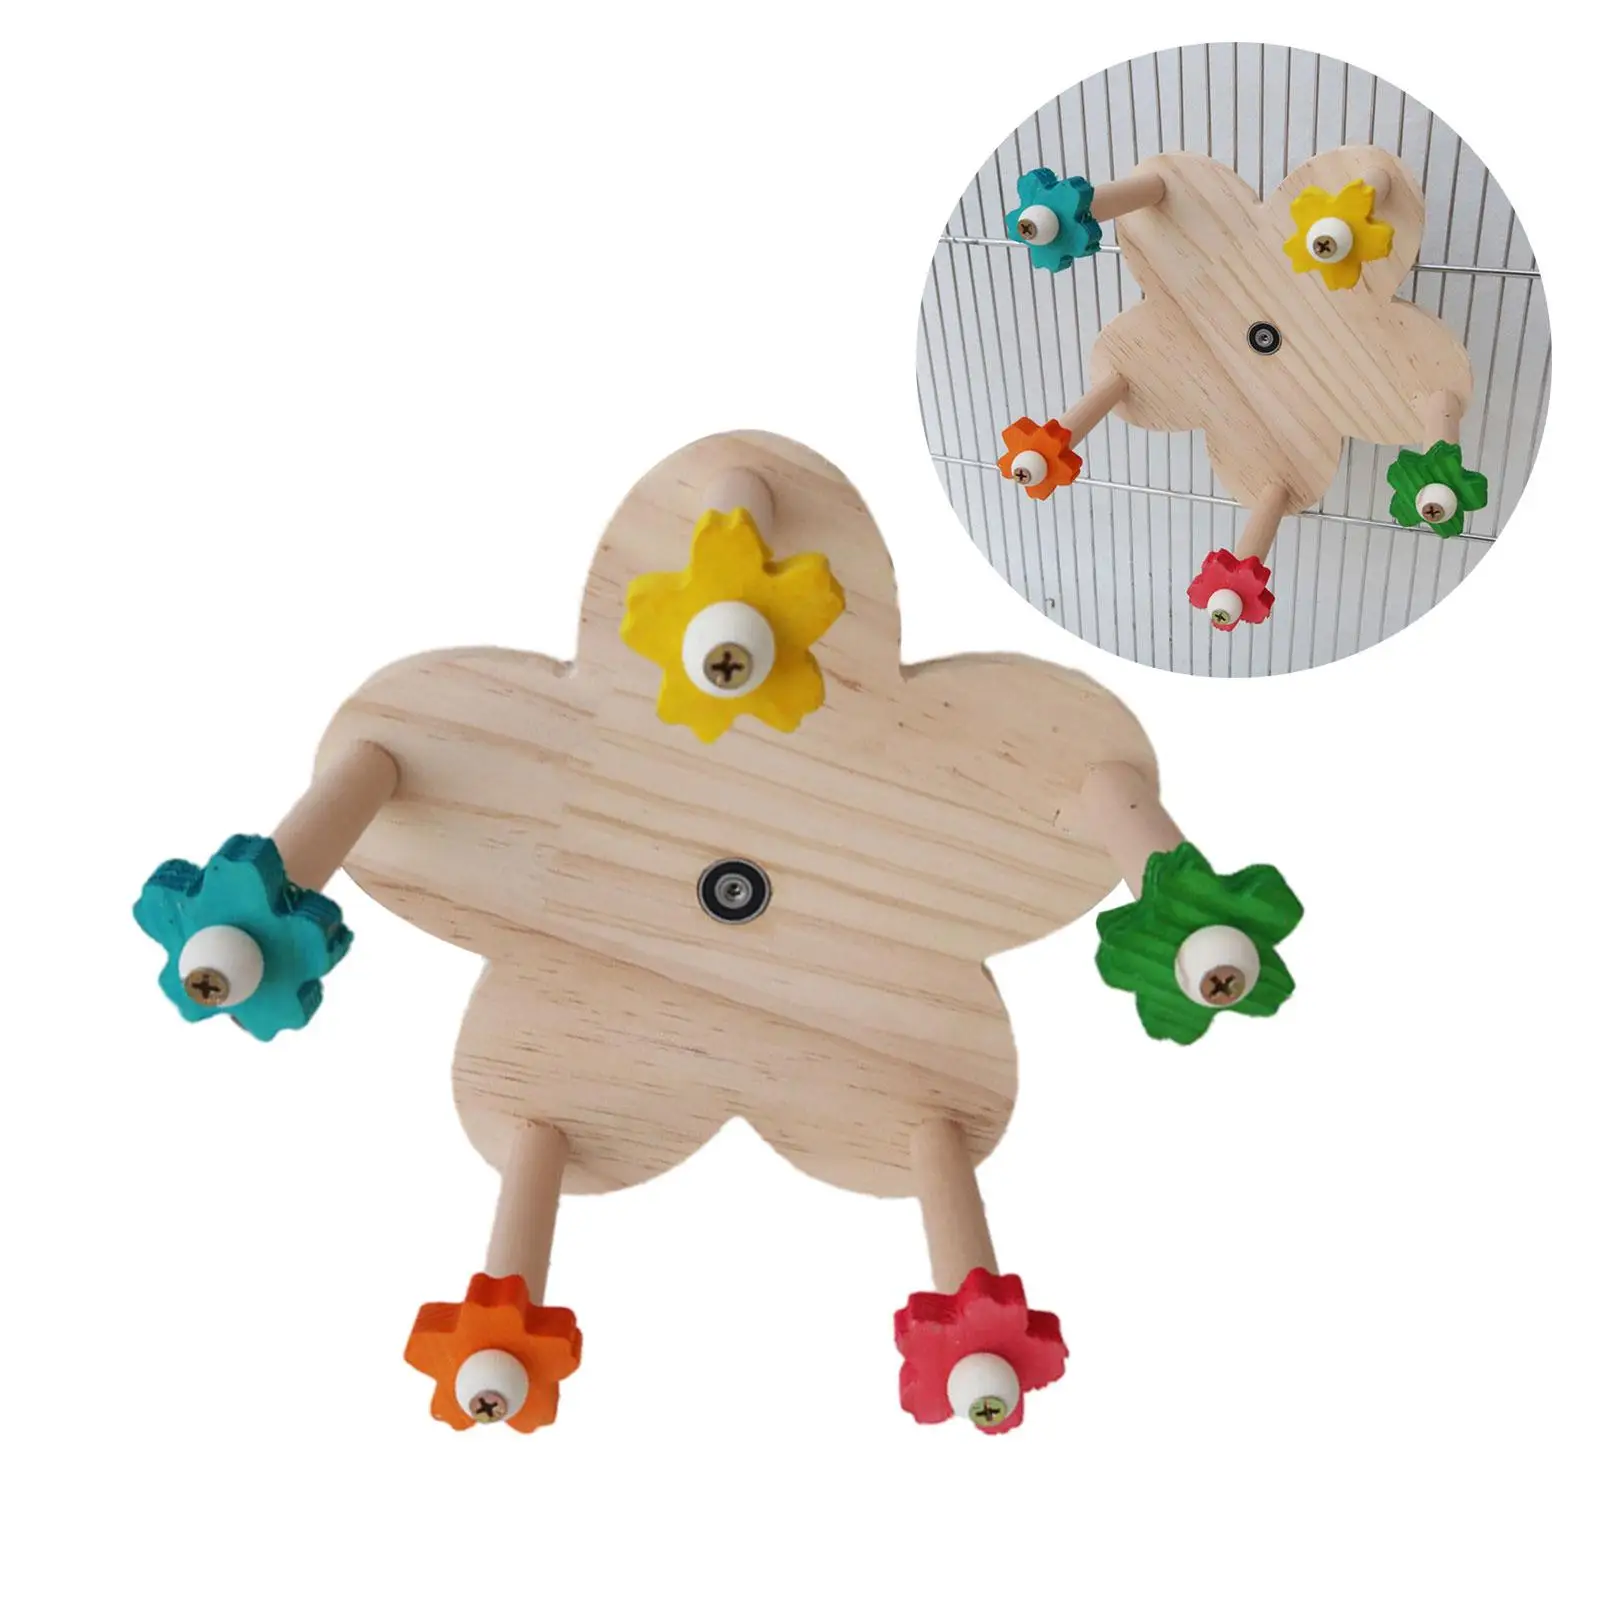 Parrot Perch Wheel Toy Unique Bird Perch Stand for Macaws Lovebirds Budgies